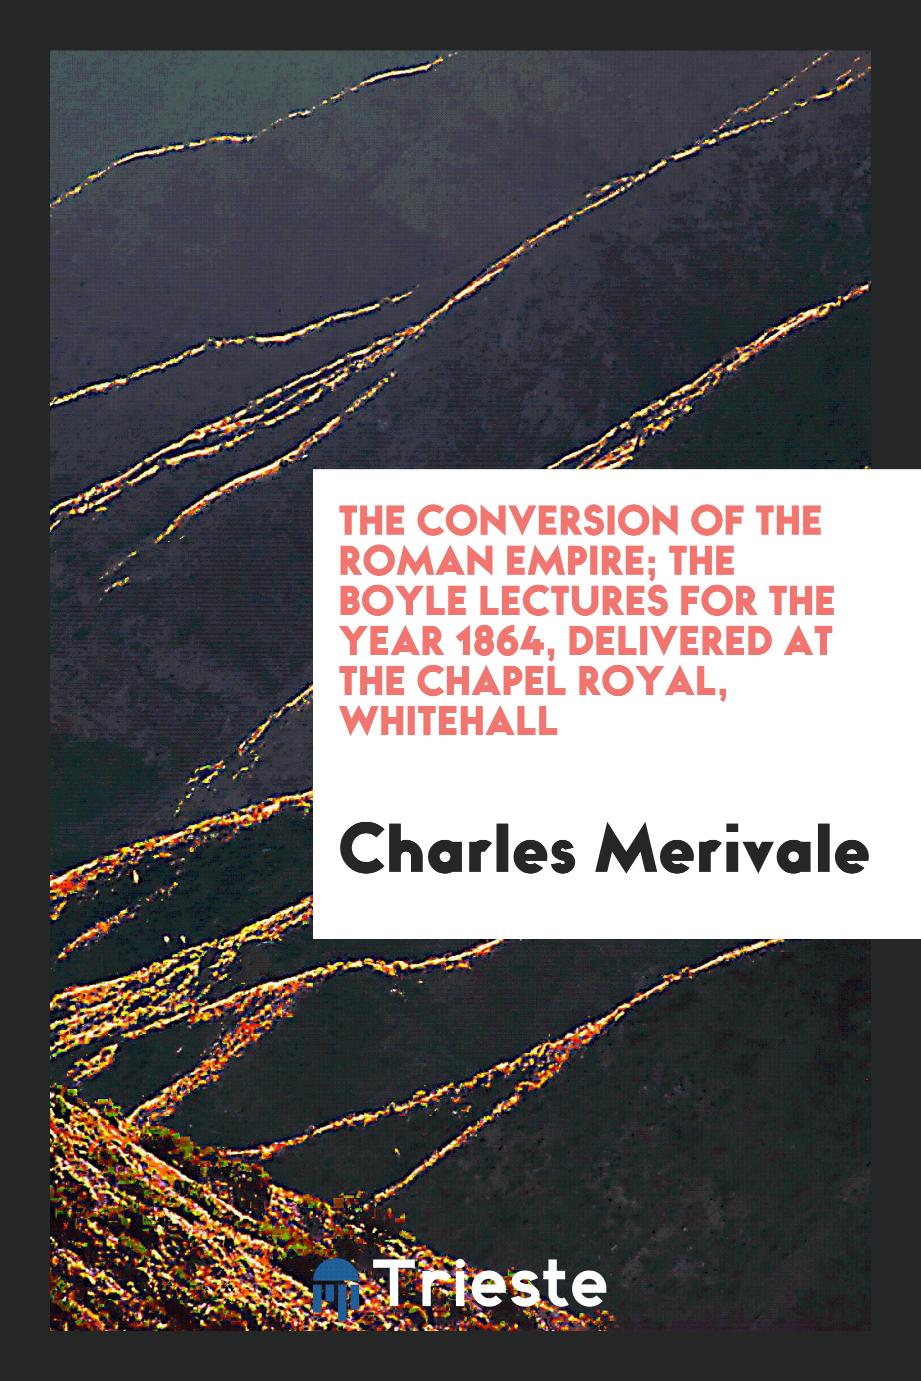 The conversion of the Roman empire; the Boyle lectures for the year 1864, delivered at the Chapel Royal, Whitehall